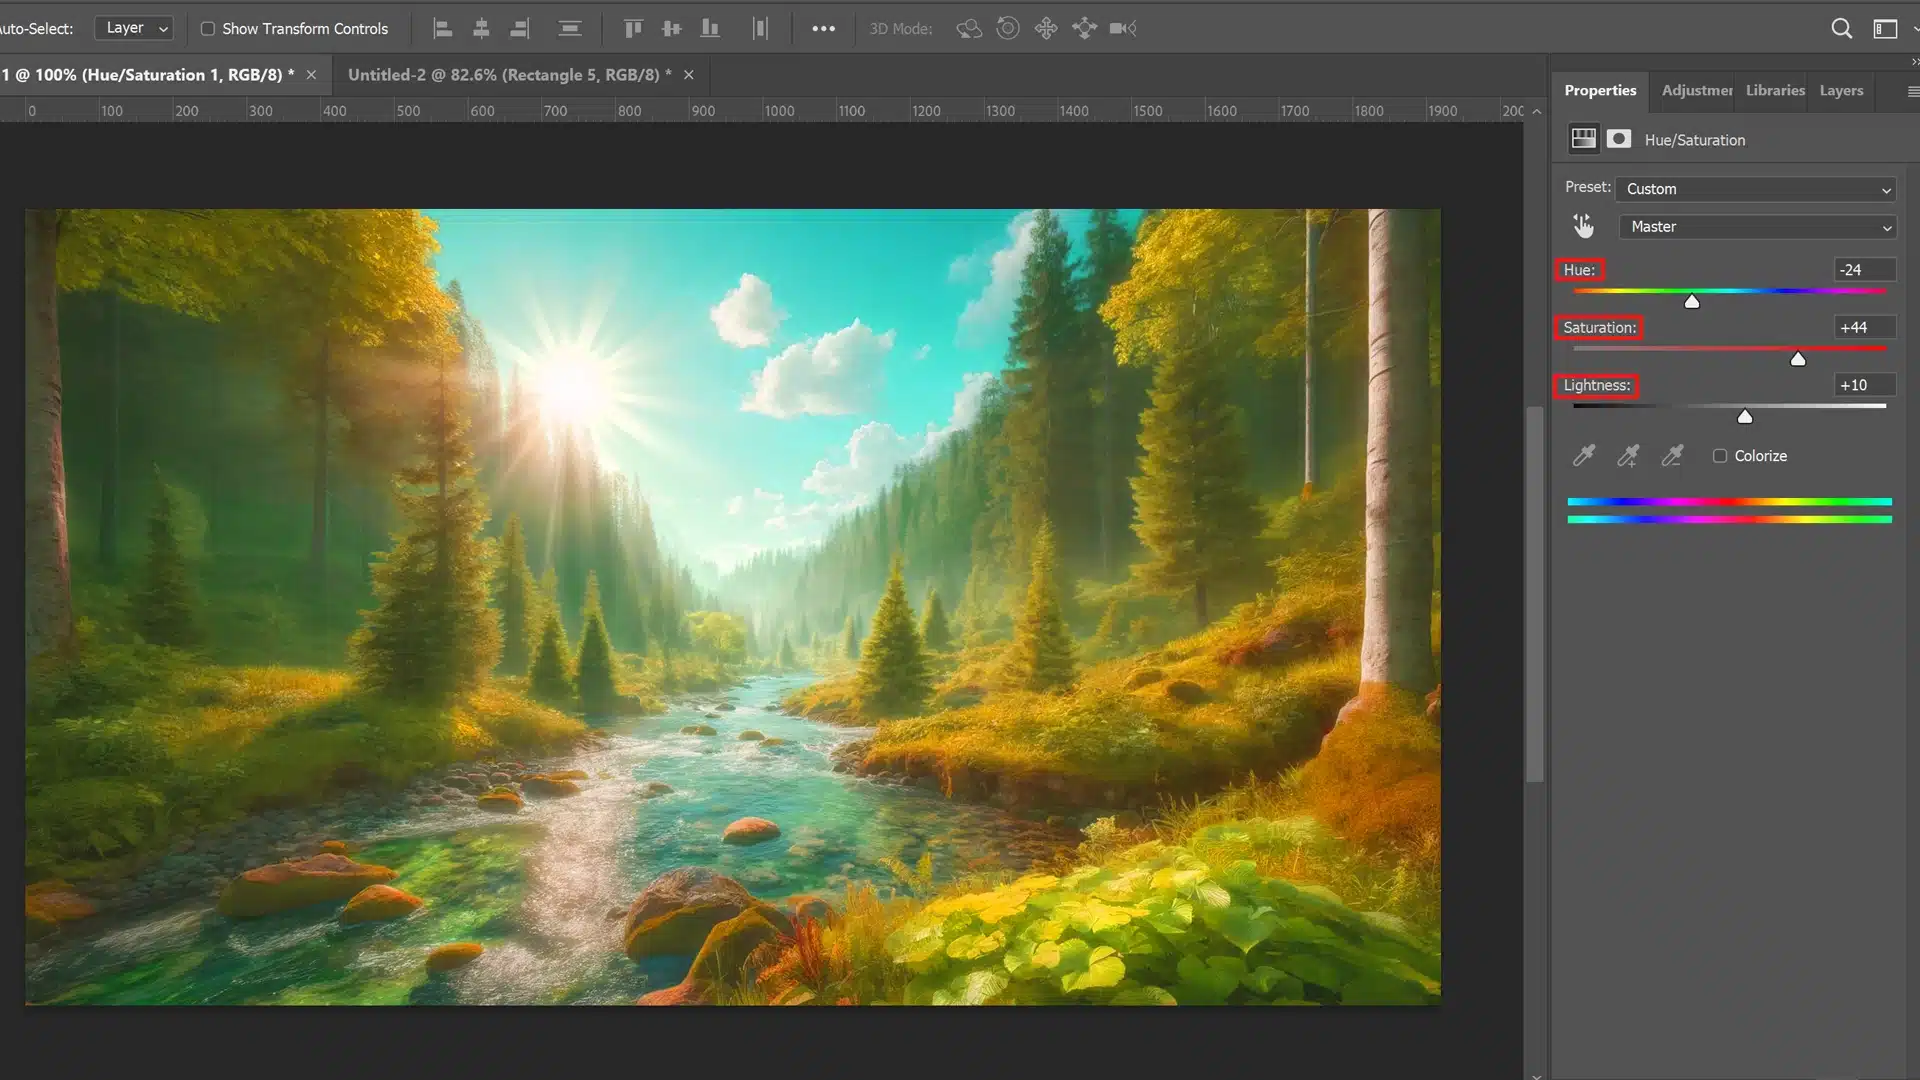 Adobe Photoshop with a forest landscape on the canvas. The 'Hue/Saturation' adjustment panel is open on the right, showing settings for Hue (-24), Saturation (+44), and Lightness (+10).